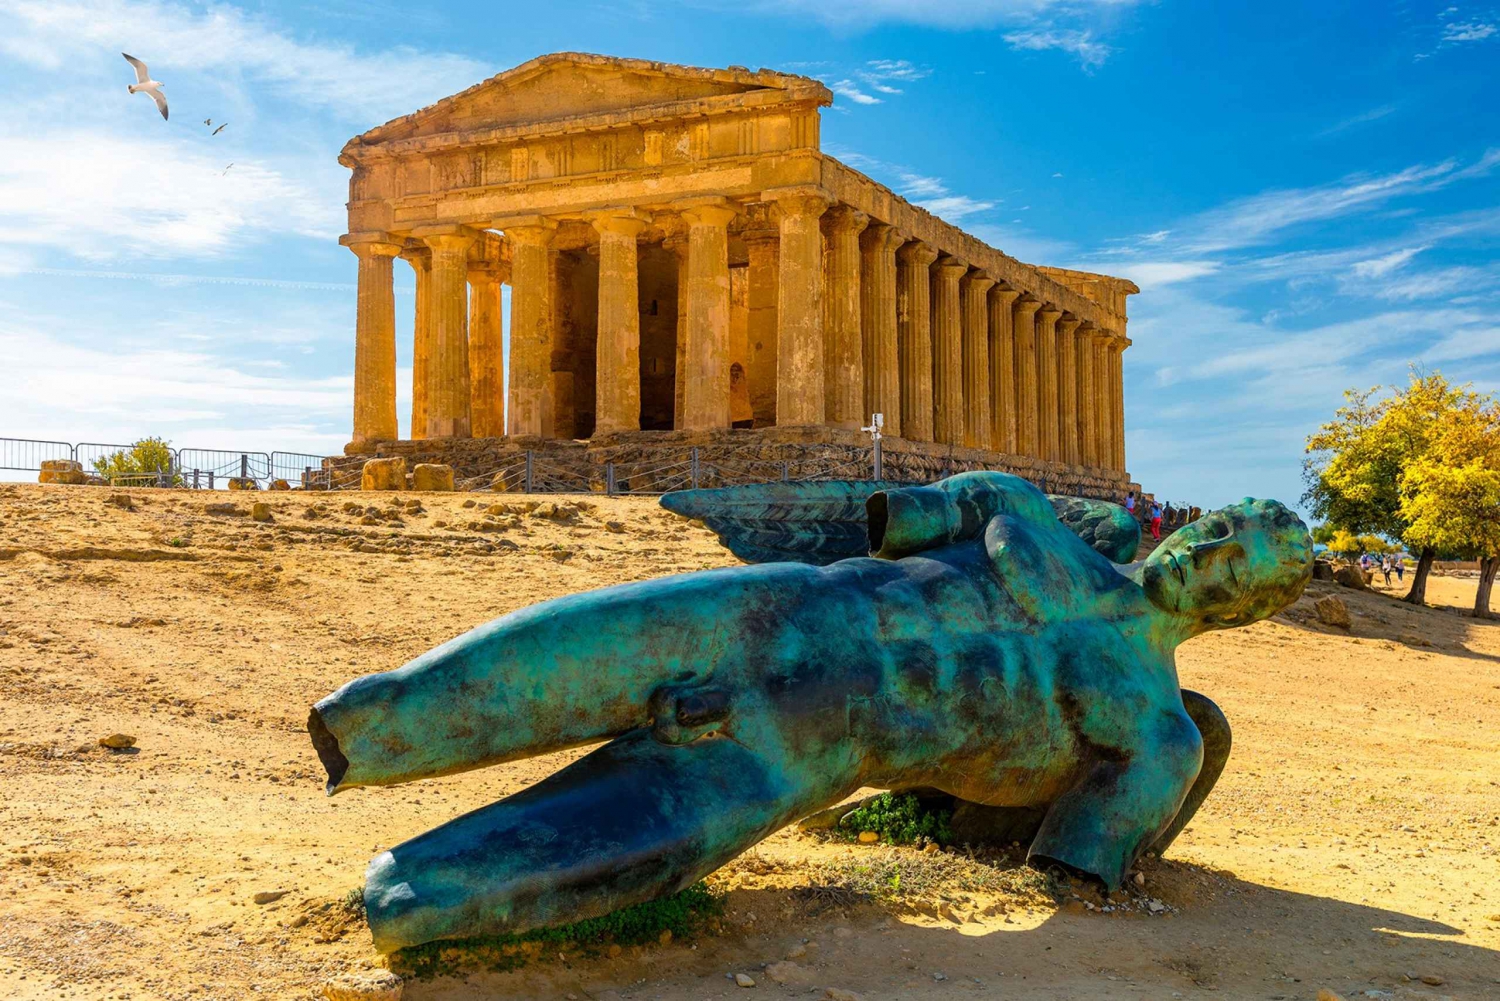 From Cefalù: Guided Tour to Agrigento Valley of the Temples